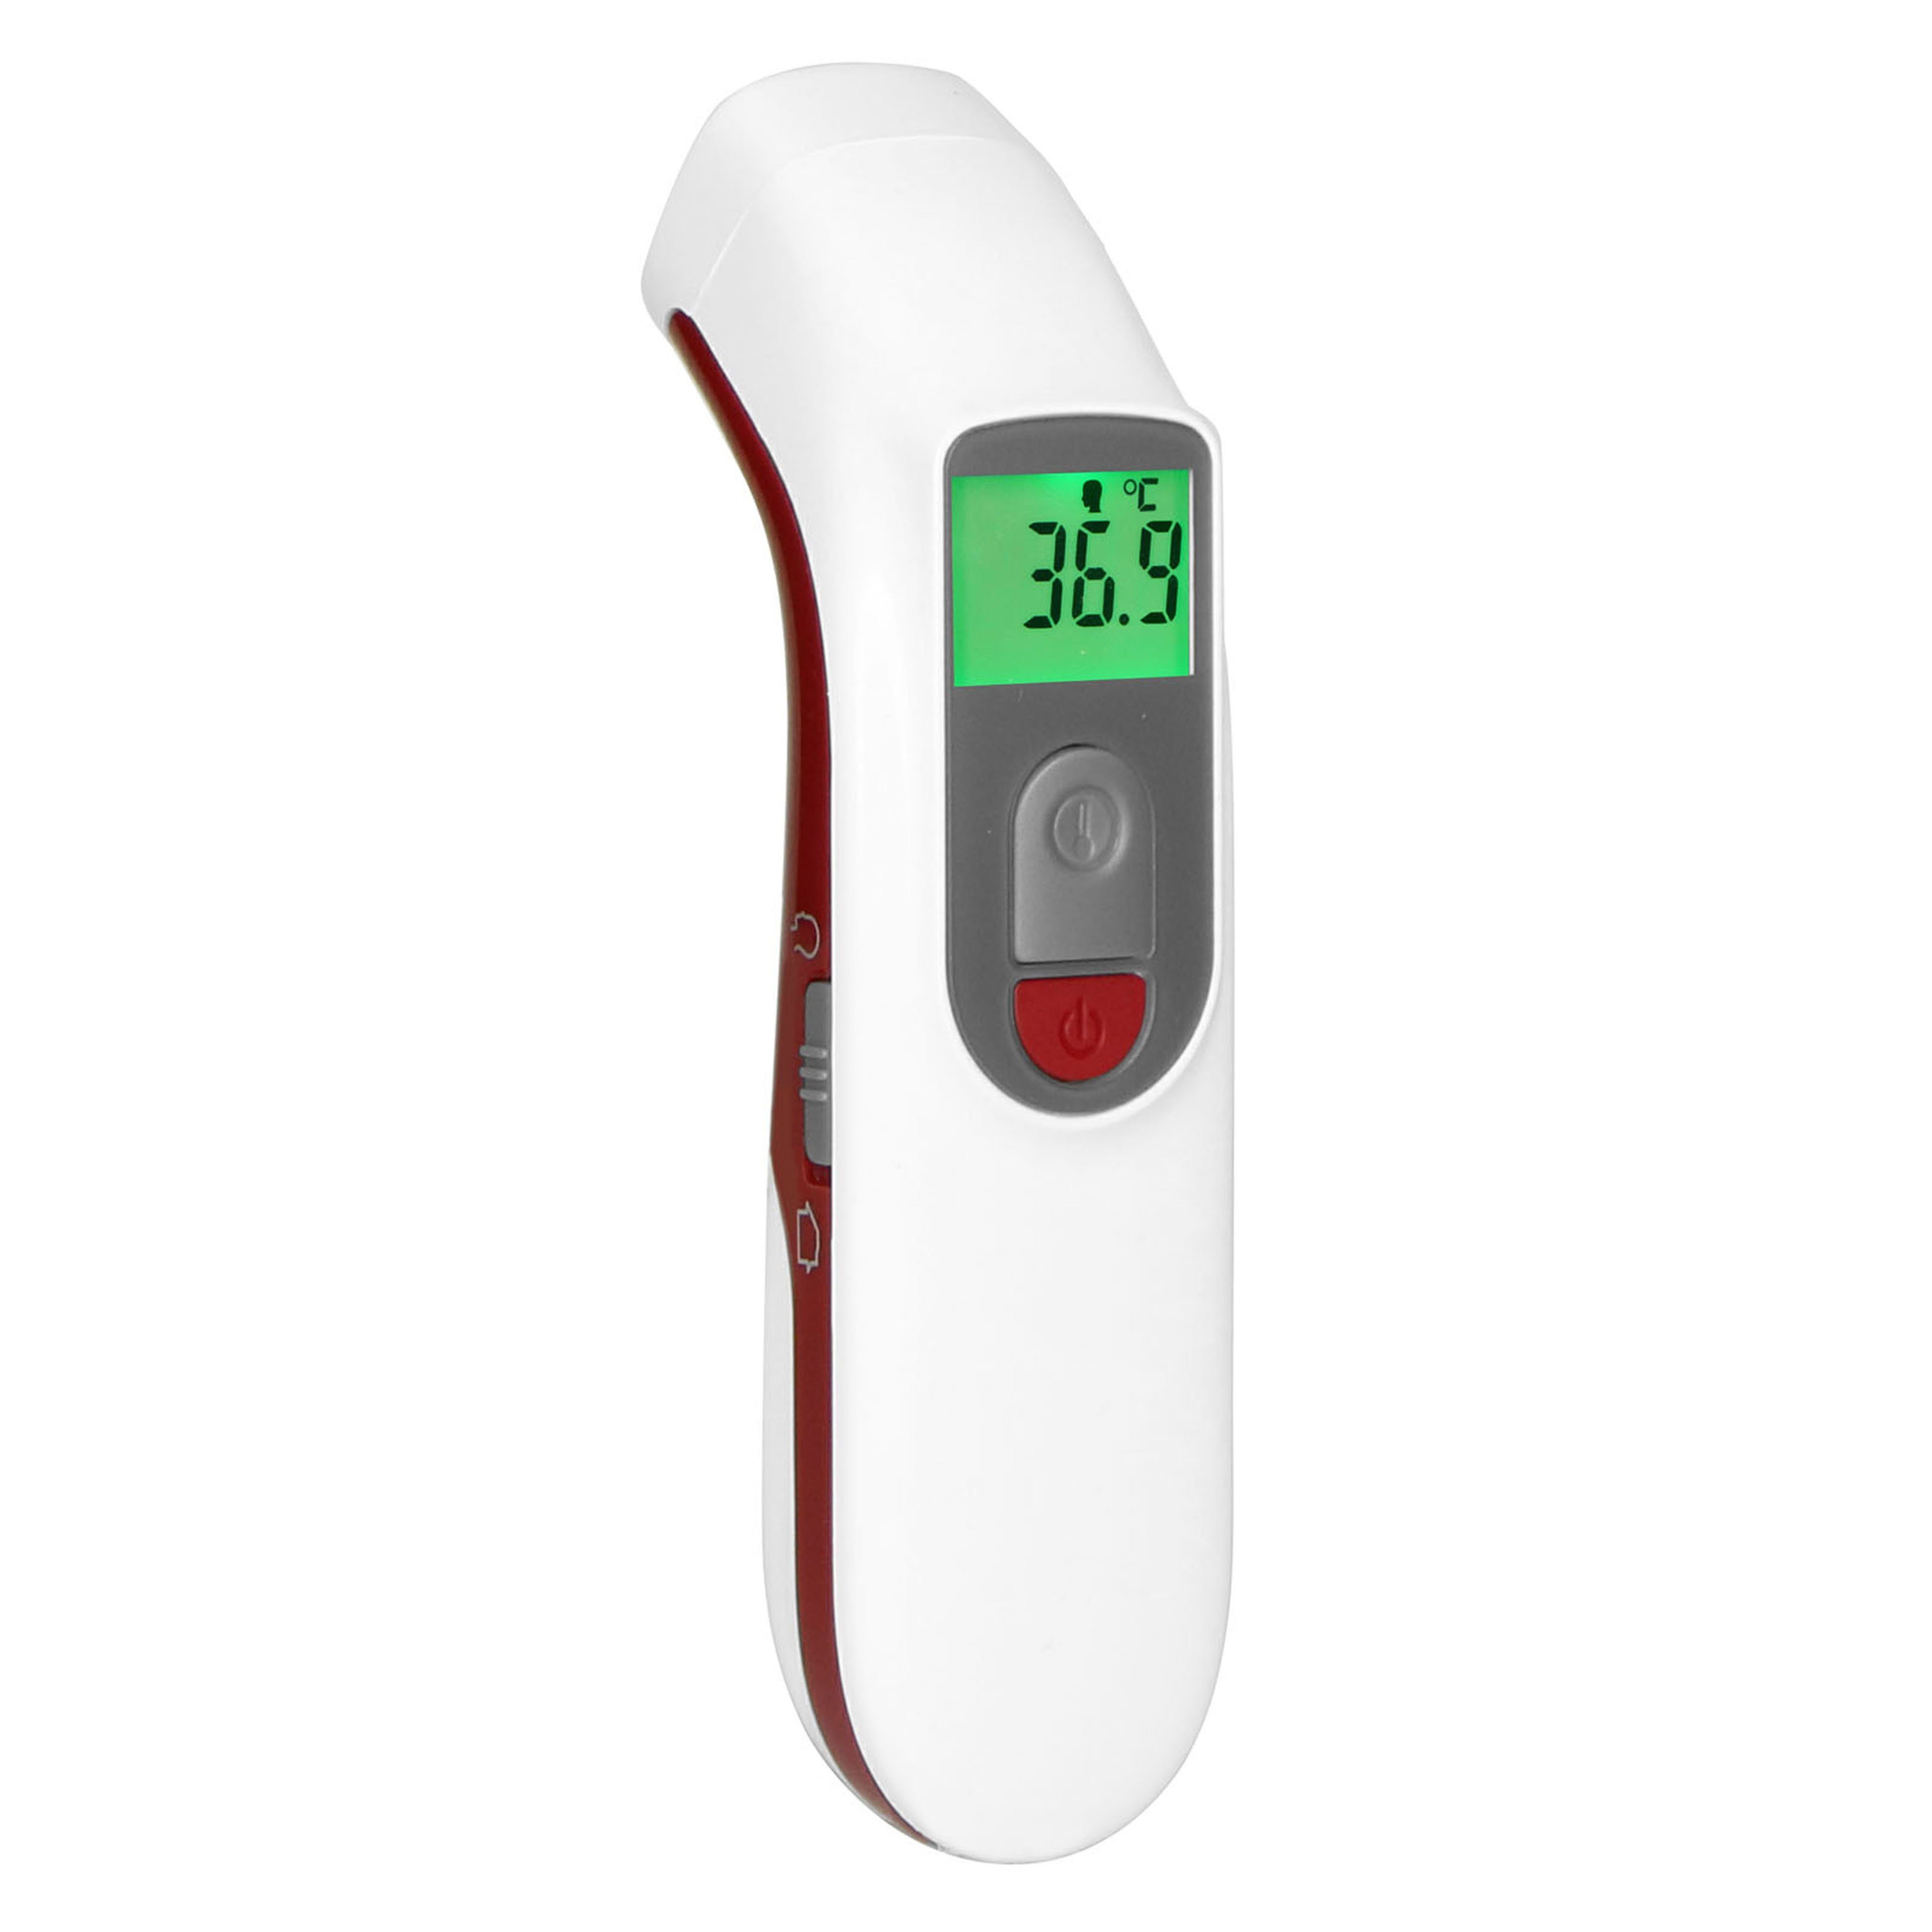 Alecto Home Alecto Fieberthermometer BC38, Infrarot-Stirnthermometer 1-tlg